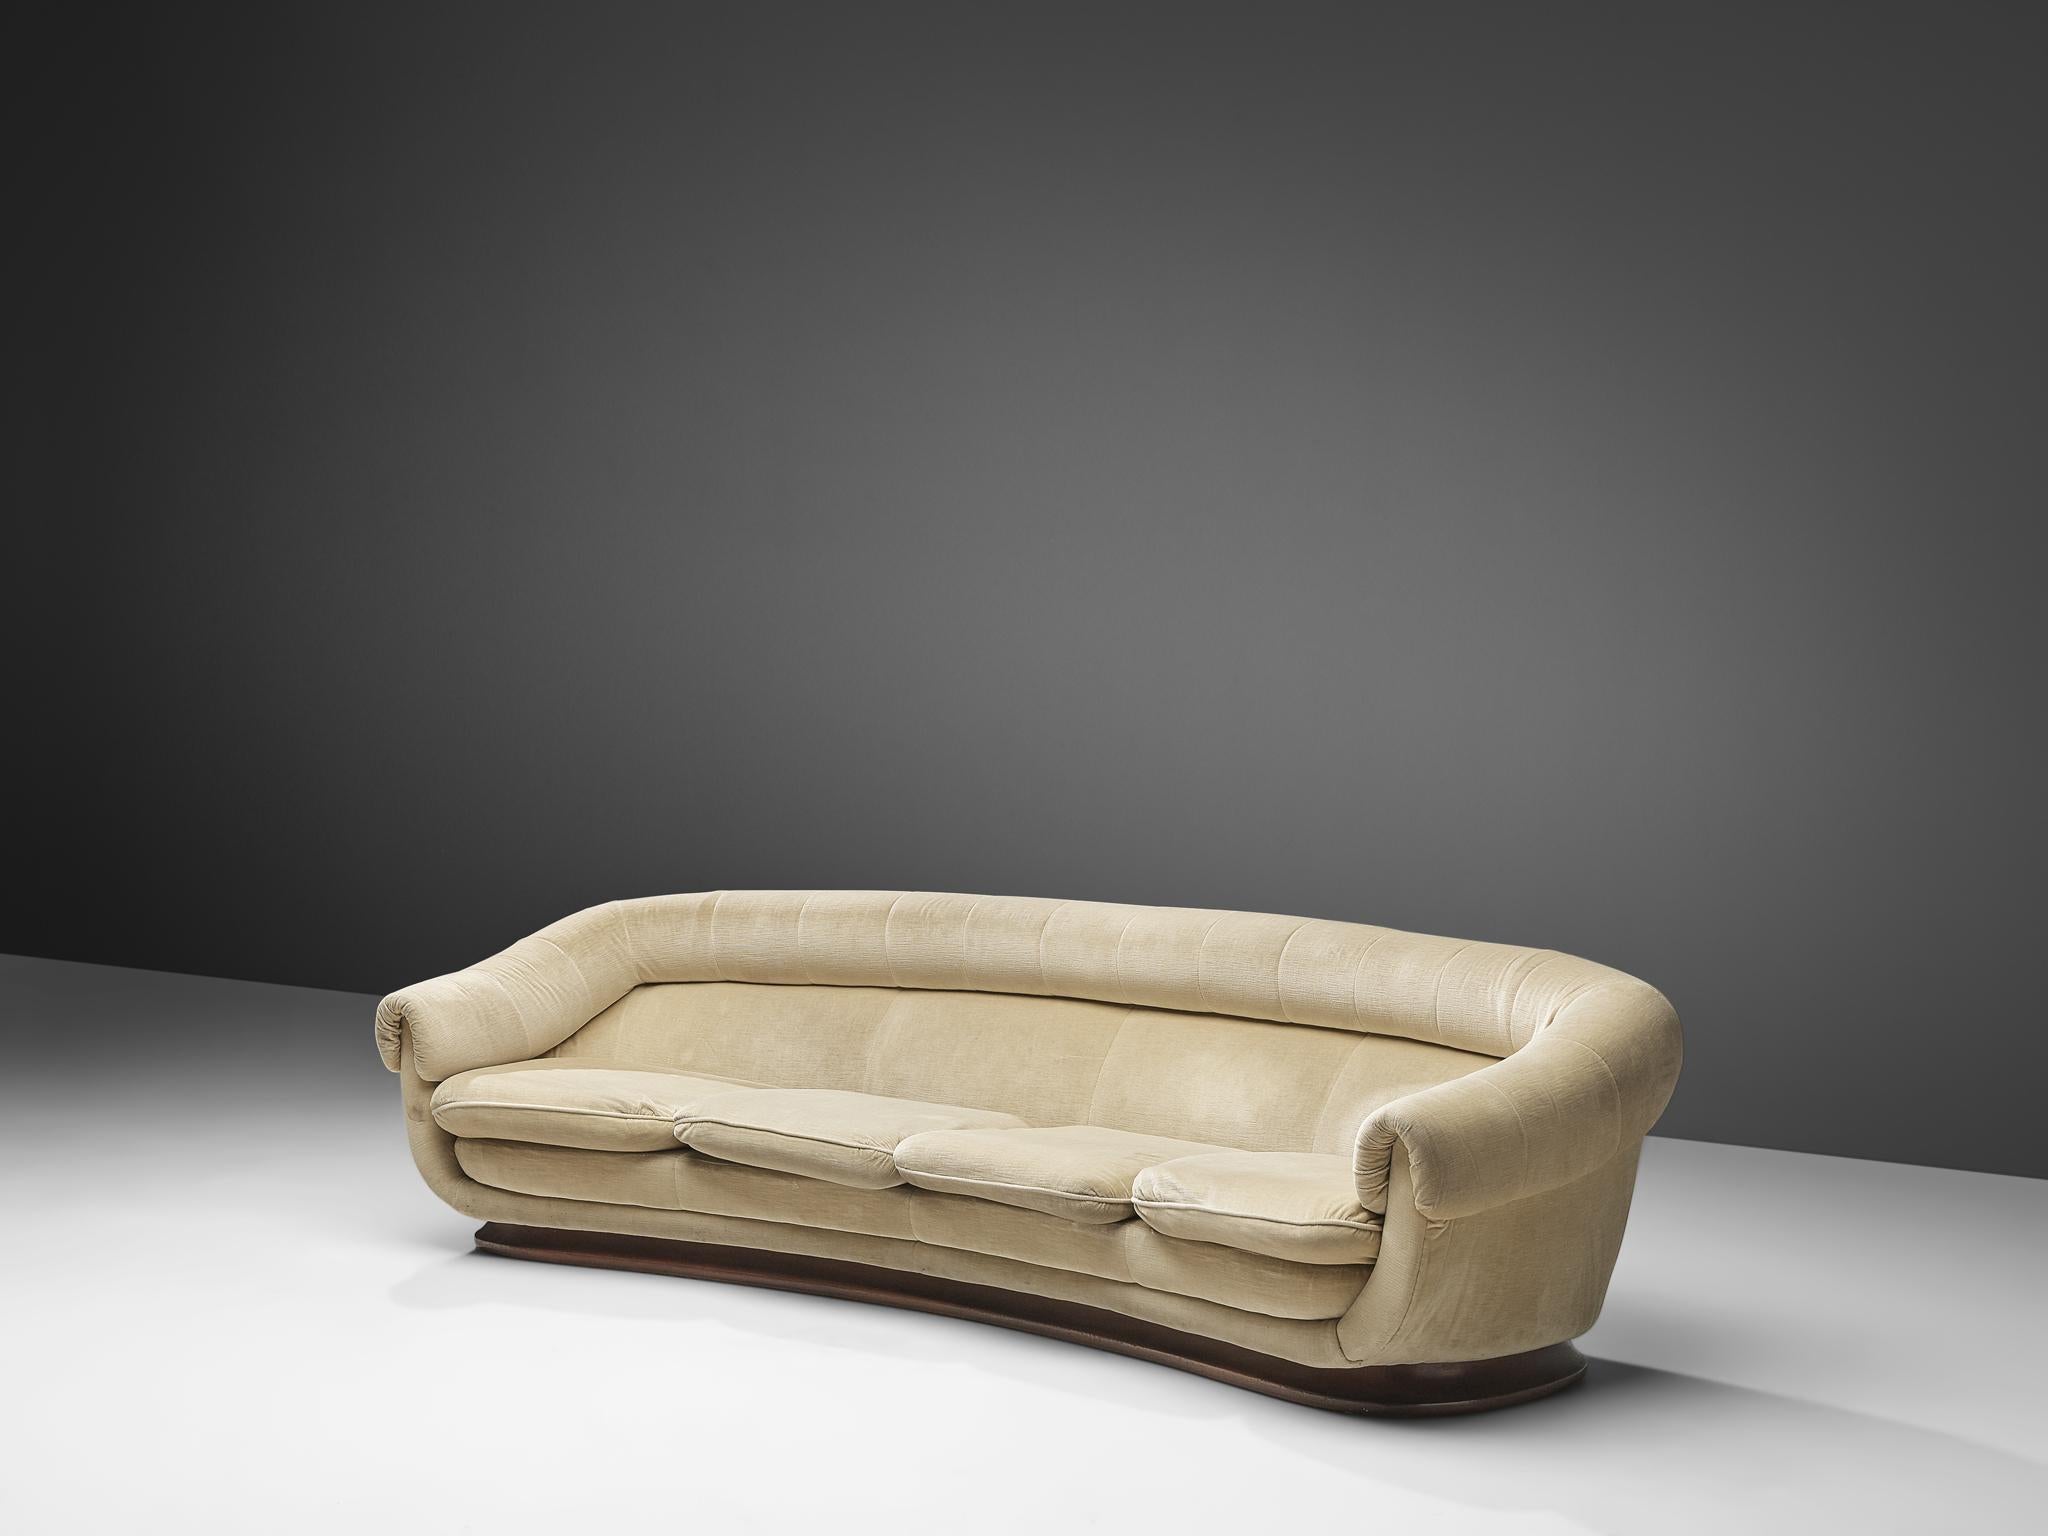 Curved sofa, velvet upholstery, wood, Italy, 1940s

A beautiful curved sofa made in Italy in the 1940s. This sofa bears multiple dynamic features, obviously the the shape of the entire body of the piece that has an elegant curve in it. Secondly, the